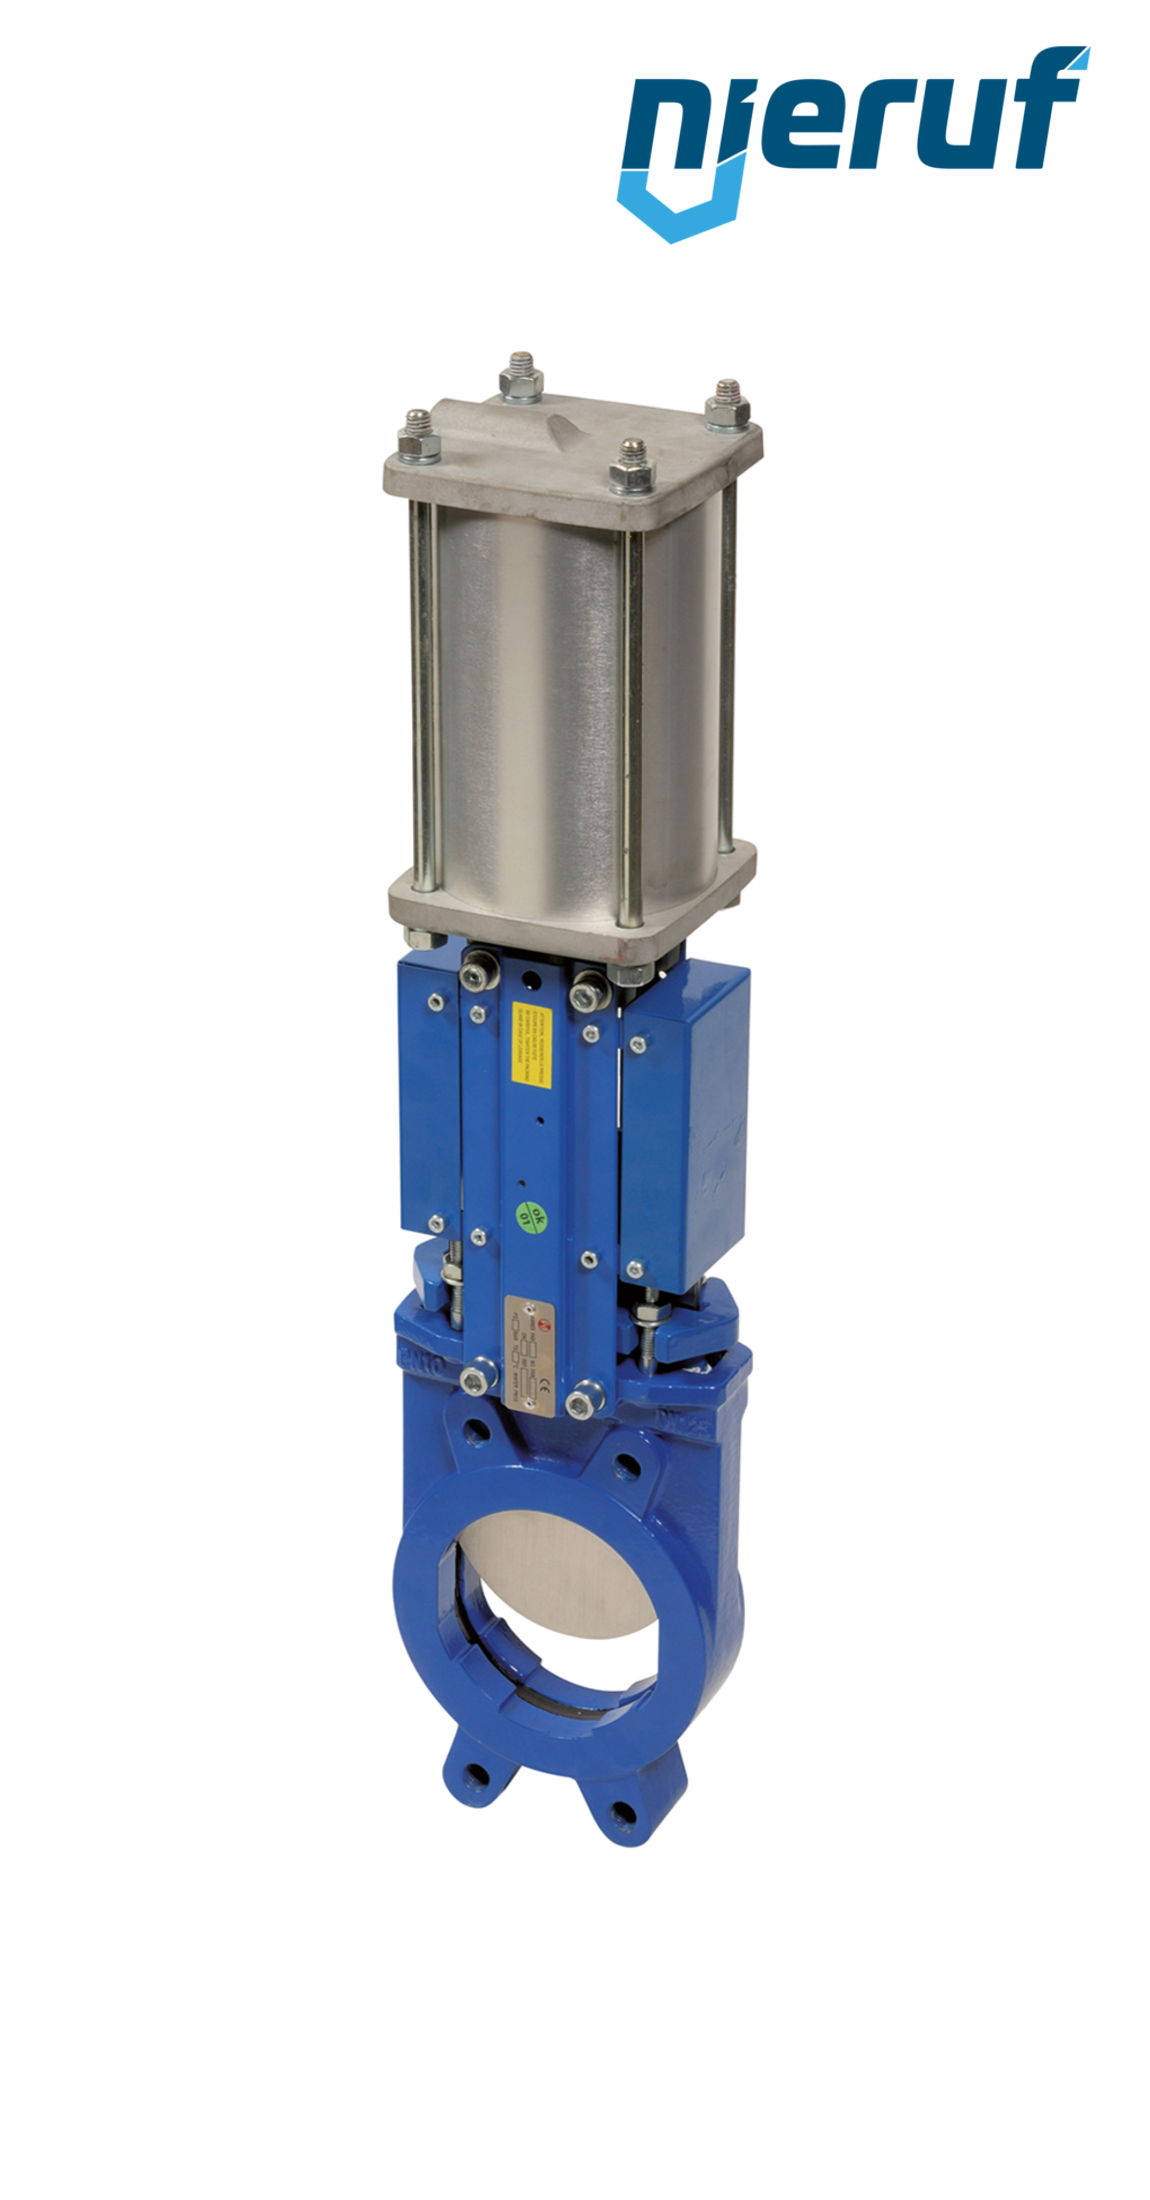 Knife gate valve DN 65 SR01 EPDM pneumatic actuation double acting